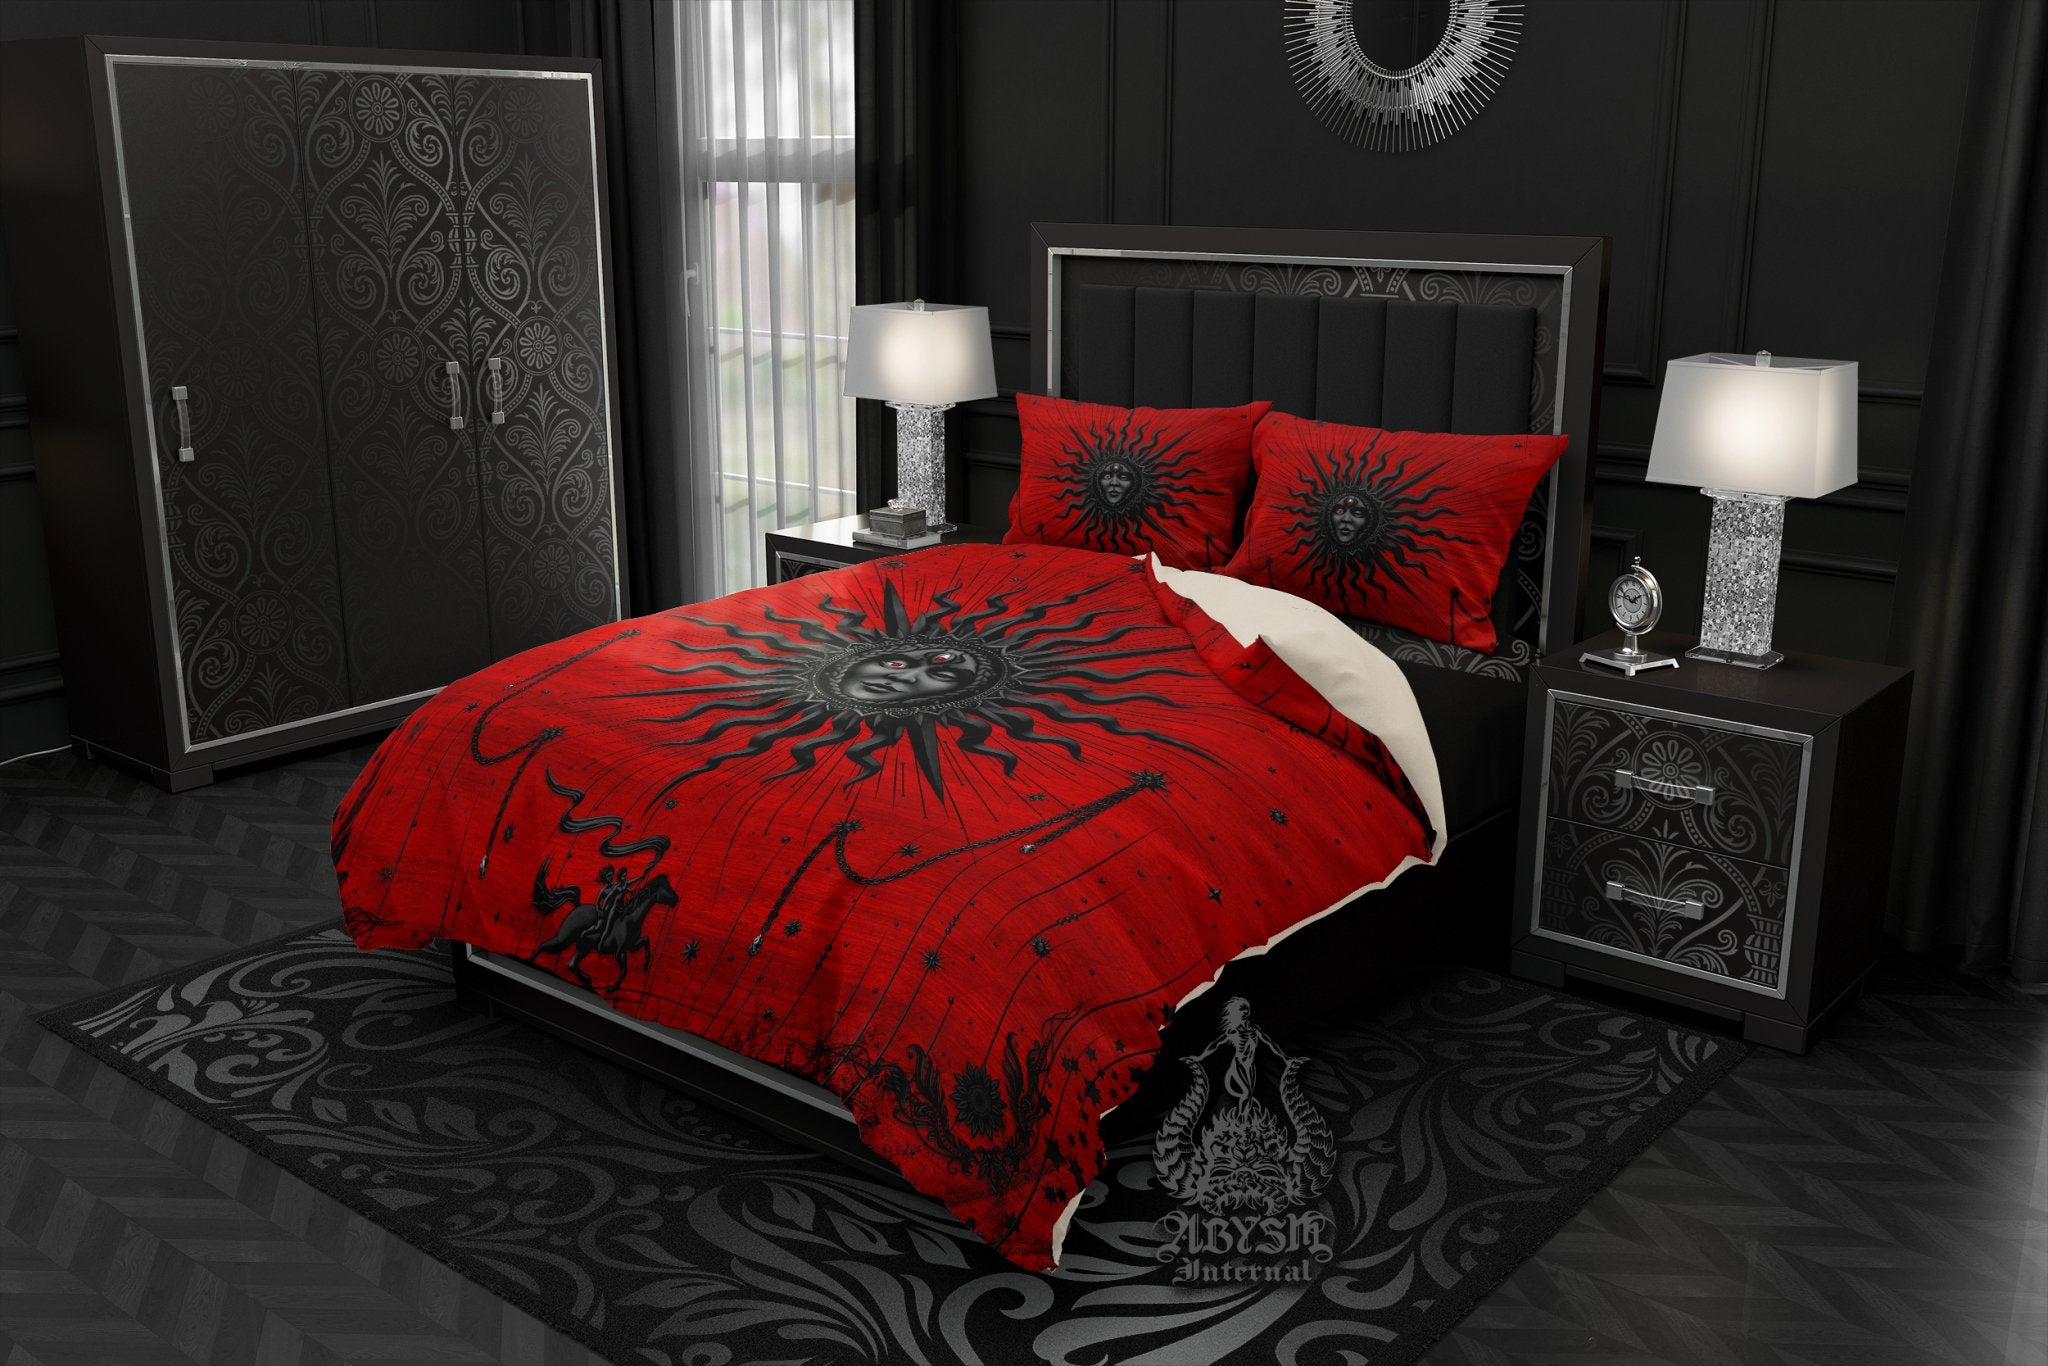 Bloody Gothic Sun Duvet Cover, Red and Black Bed Covering, Esoteric Comforter, Goth Bedroom Decor King, Queen & Twin Bedding Set - Tarot Arcana Art - Abysm Internal